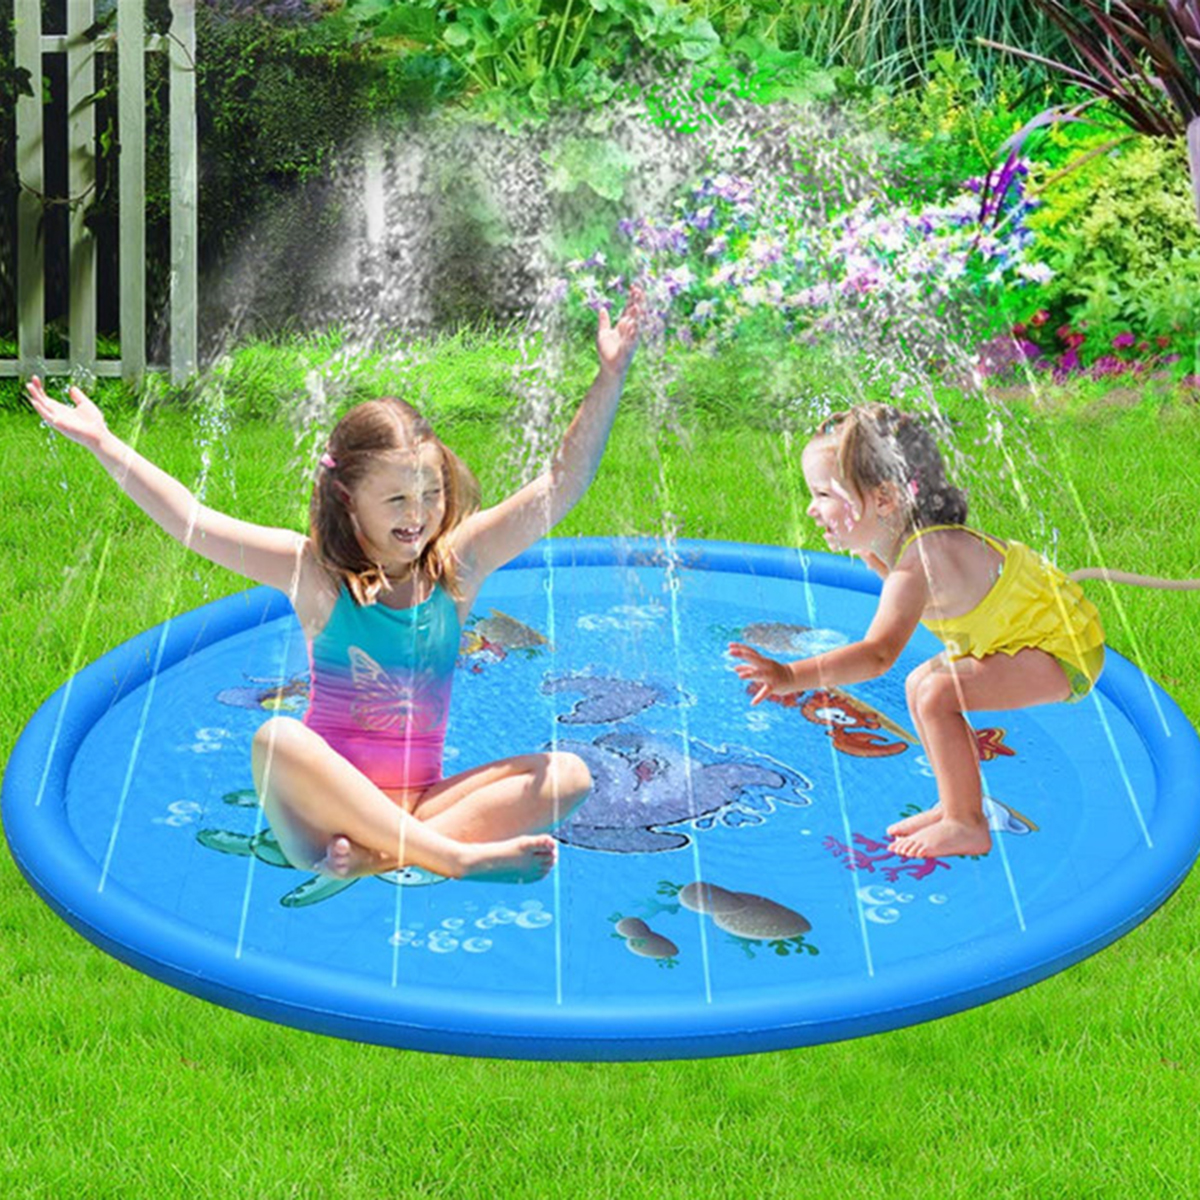 100CM Inflatable Children's Lawn Splash Sprinkler Mat Play Pad with PV...